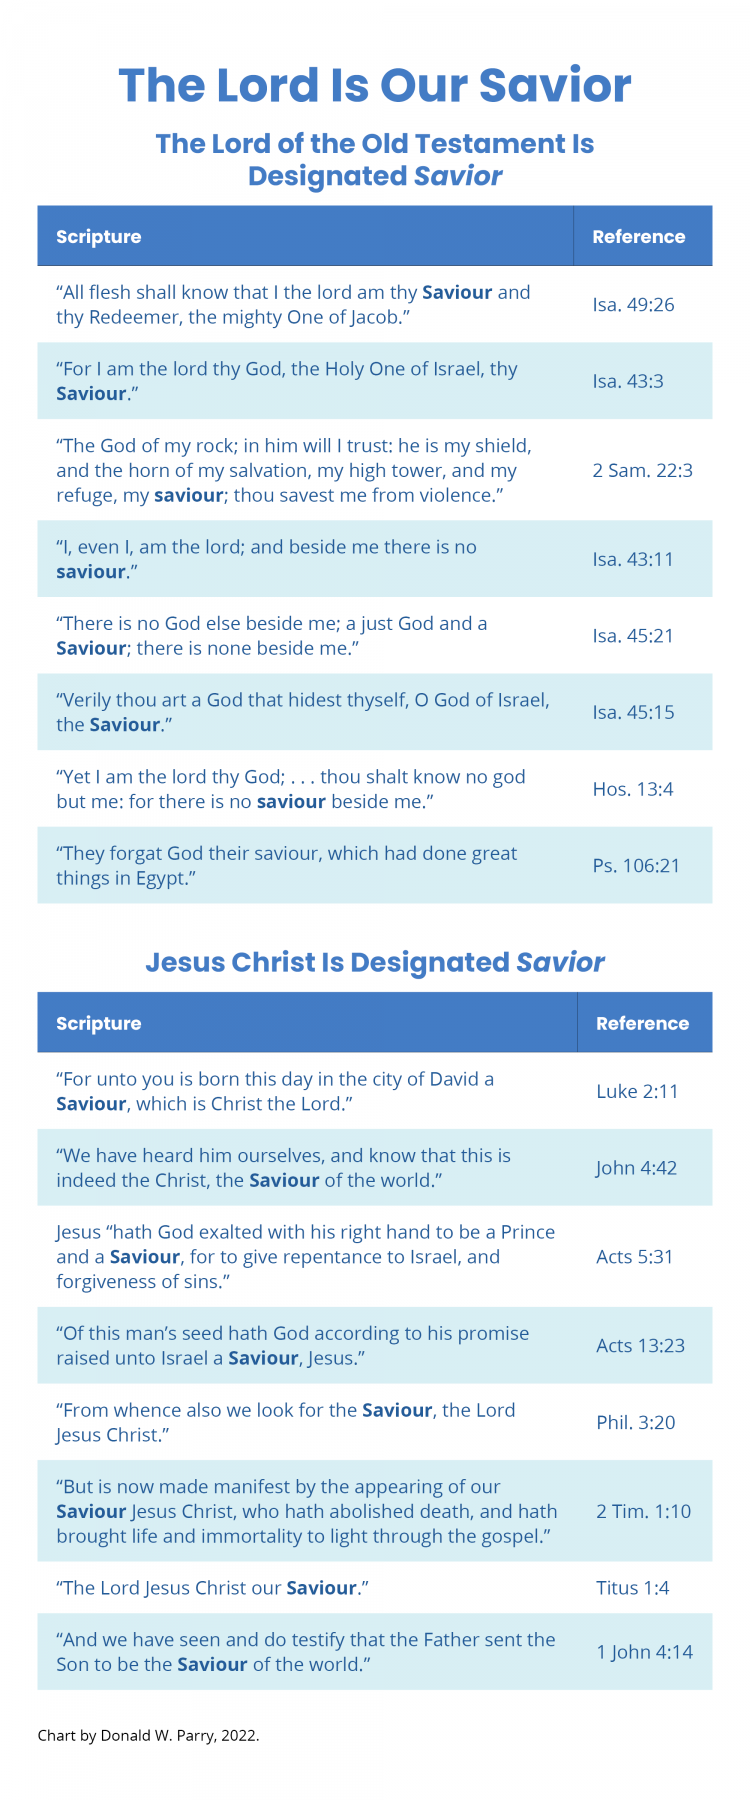 Chart by Donald W. Parry. The Lord Is Our Savior.